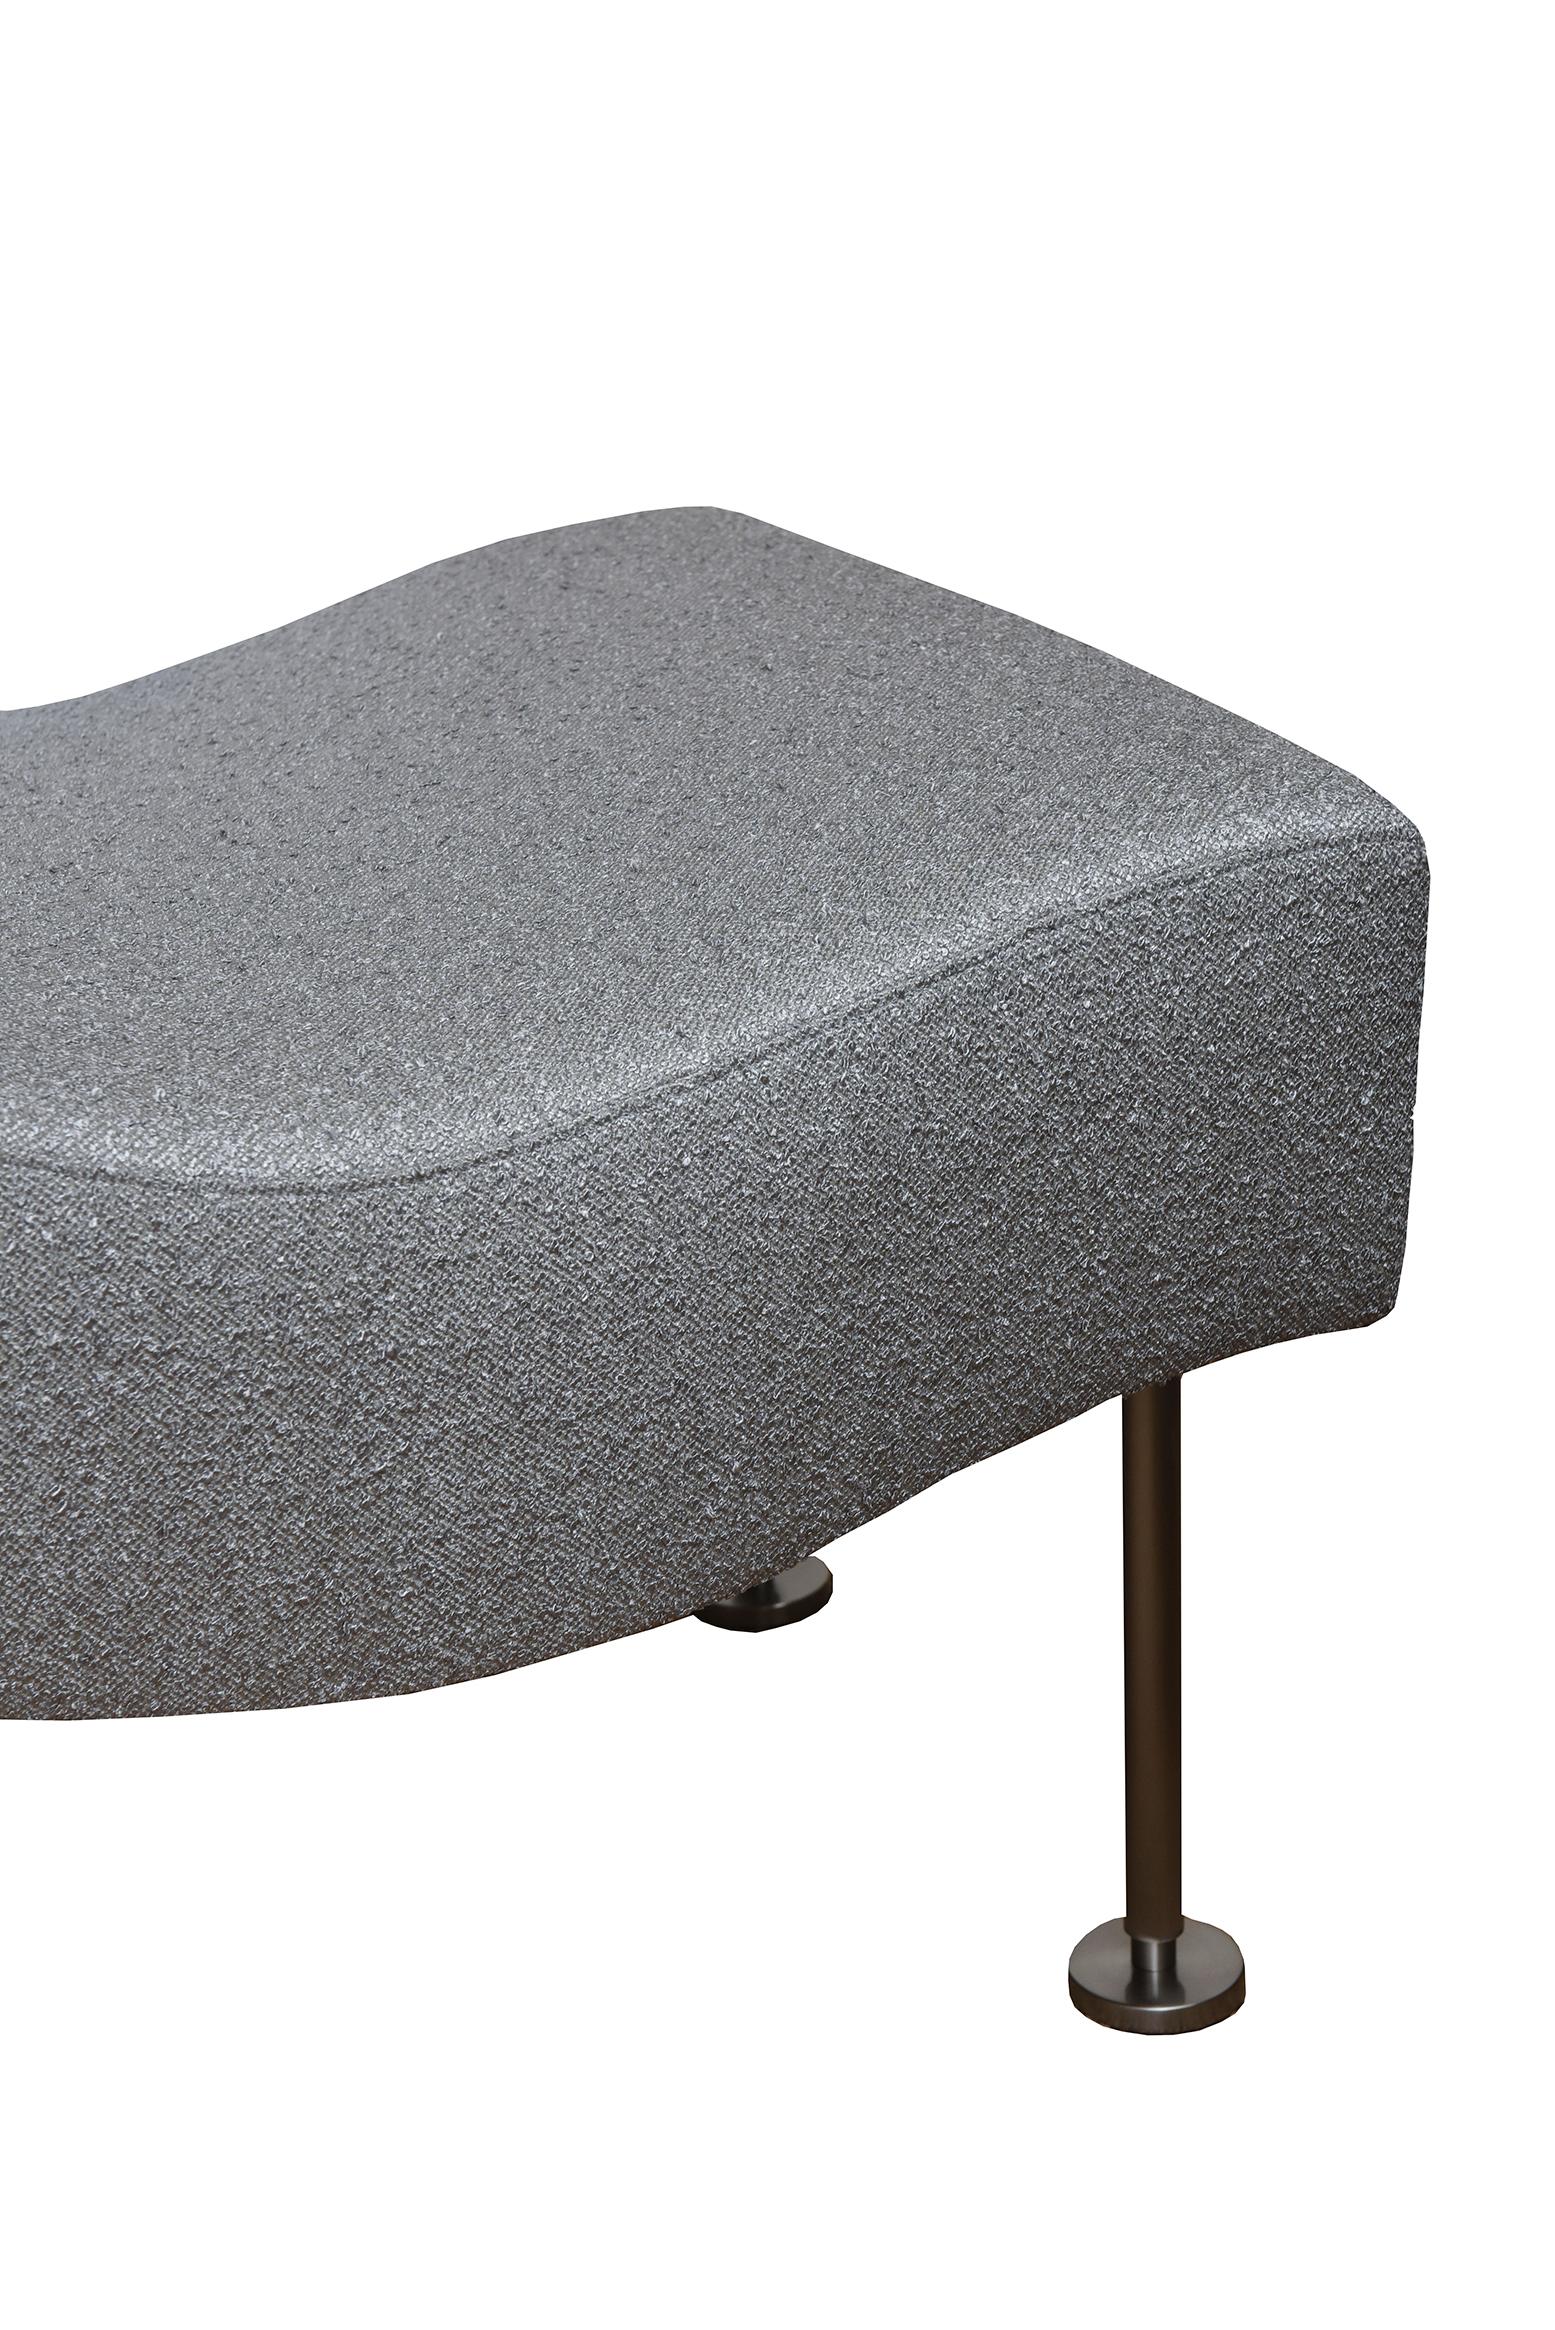 Brueton Undulatus Silver Gray Boucle Upholstered Bench with Stainless Steel Legs 6